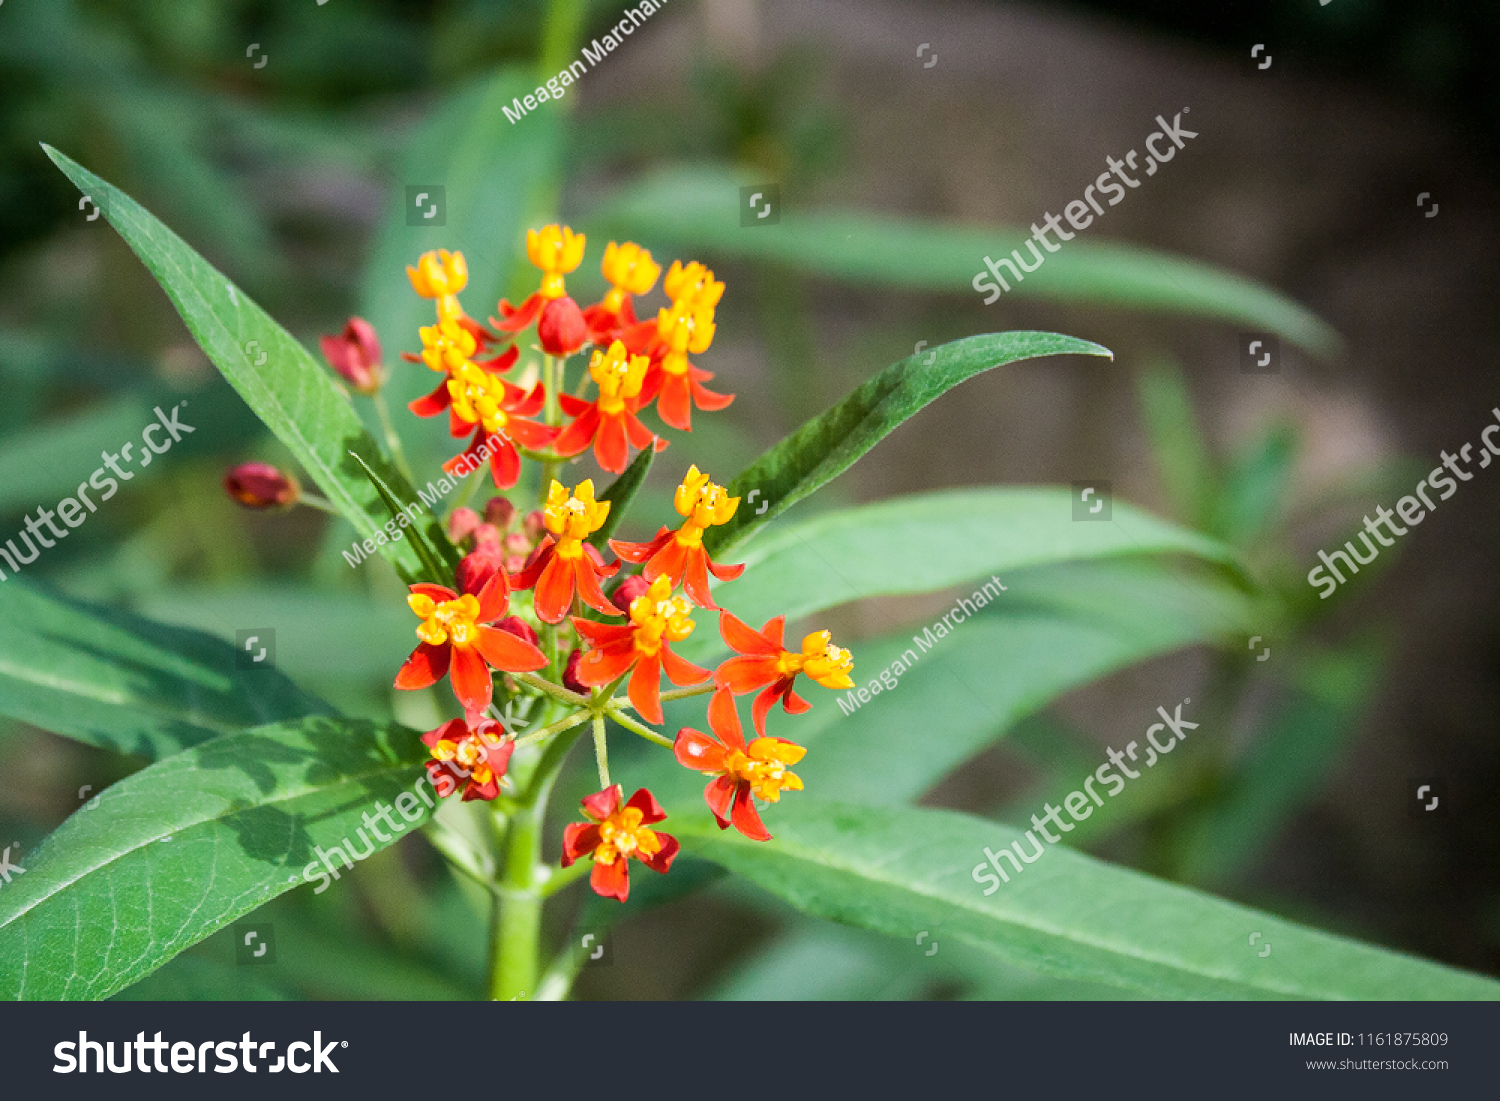 Bright yellow red and orange flowers in the sun #1161875809